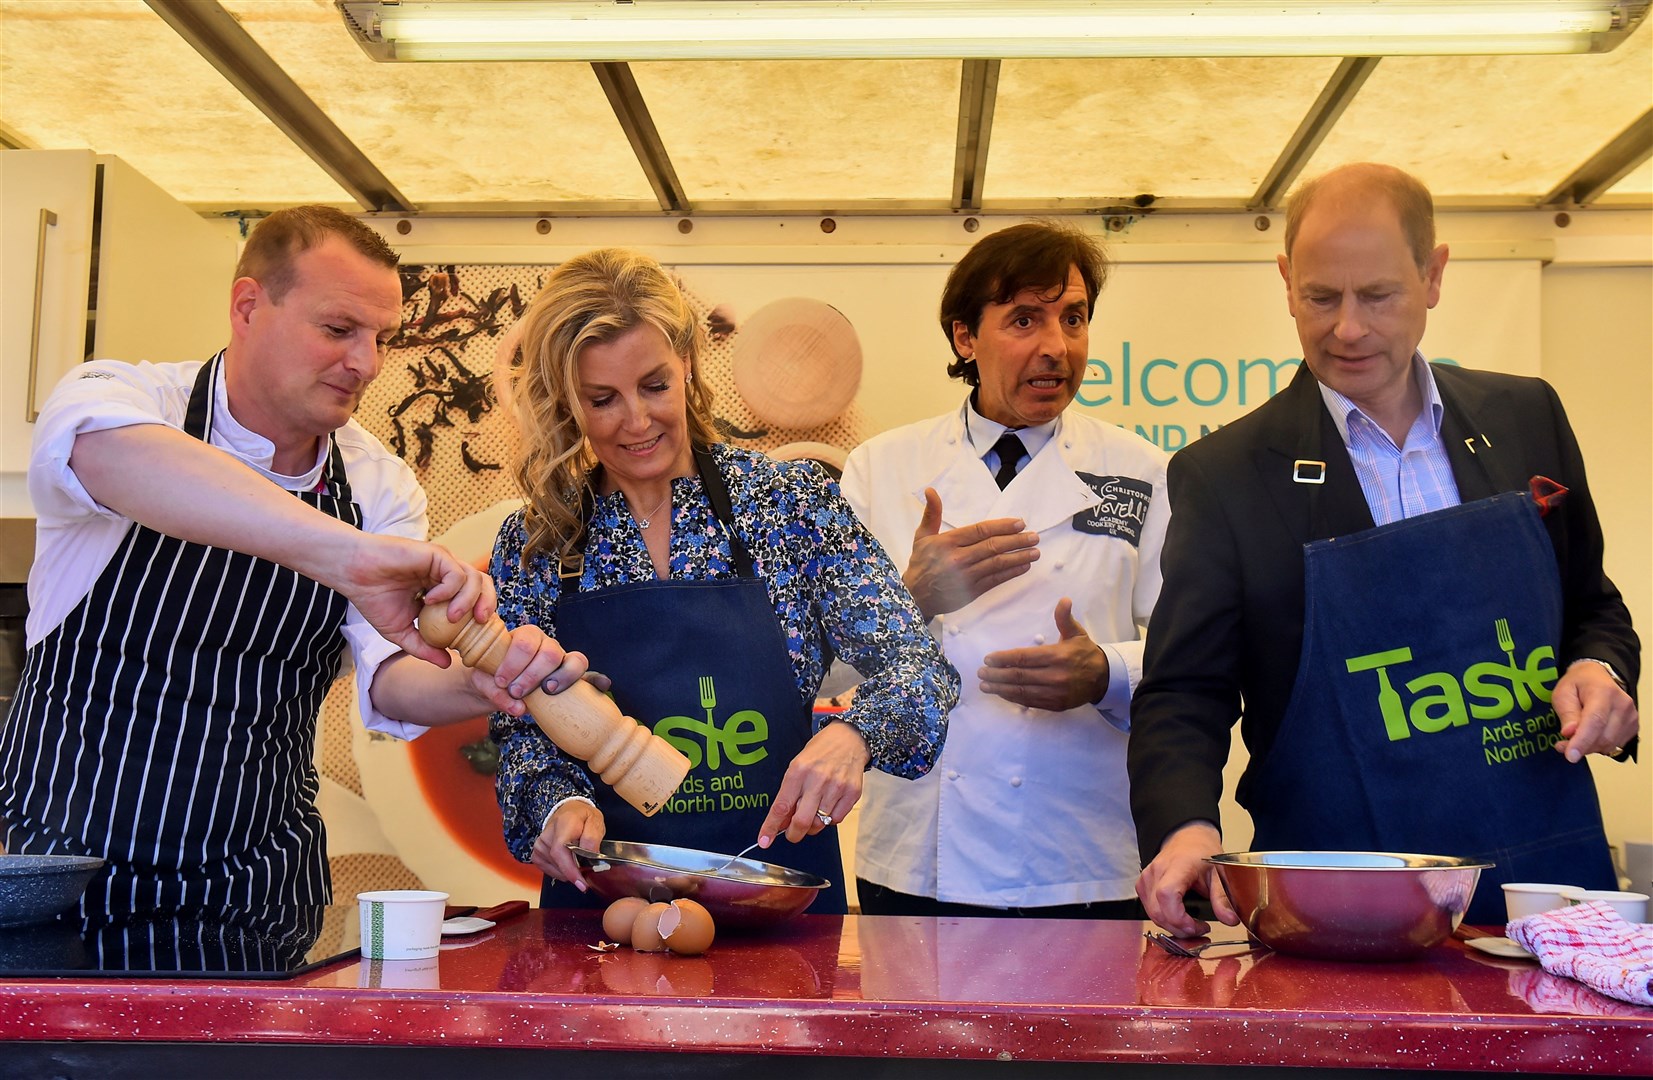 The Earl and Countess of Wessex cook omelettes with French chef Jean-Christophe Novelli during their visit to Bangor, Northern Ireland, as members of the Royal Family visit the nations of the UK to celebrate Queen Elizabeth II’s Platinum Jubilee. Picture date: Saturday June 4,, 2022.